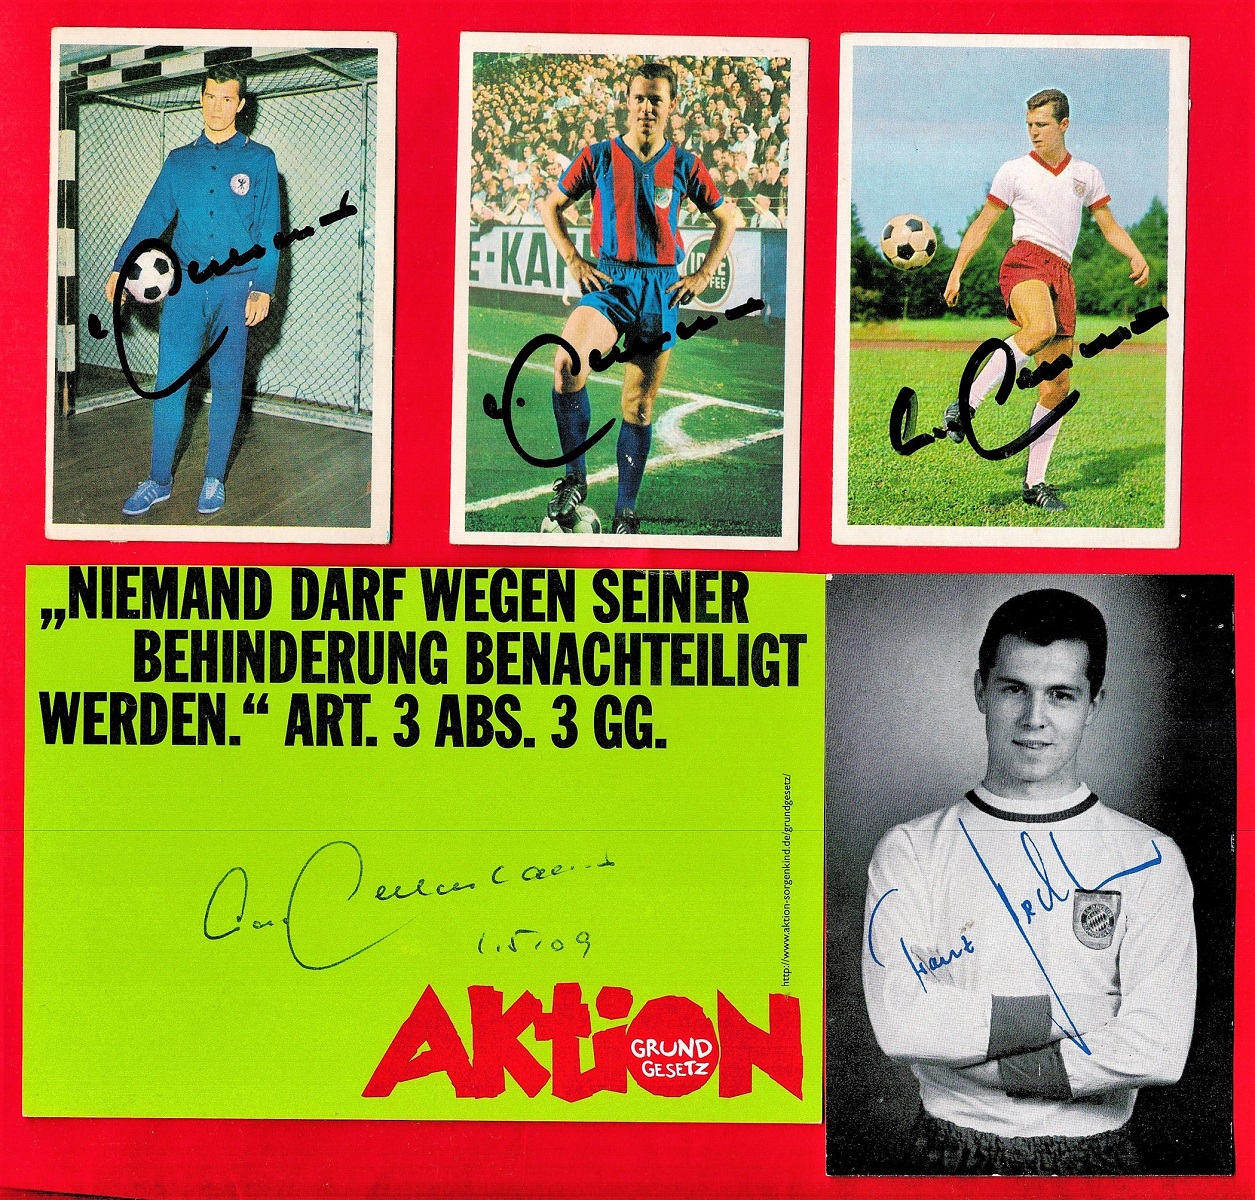 Franz Beckenbauer signed 6x4 colour promo photograph. German former professional footballer and